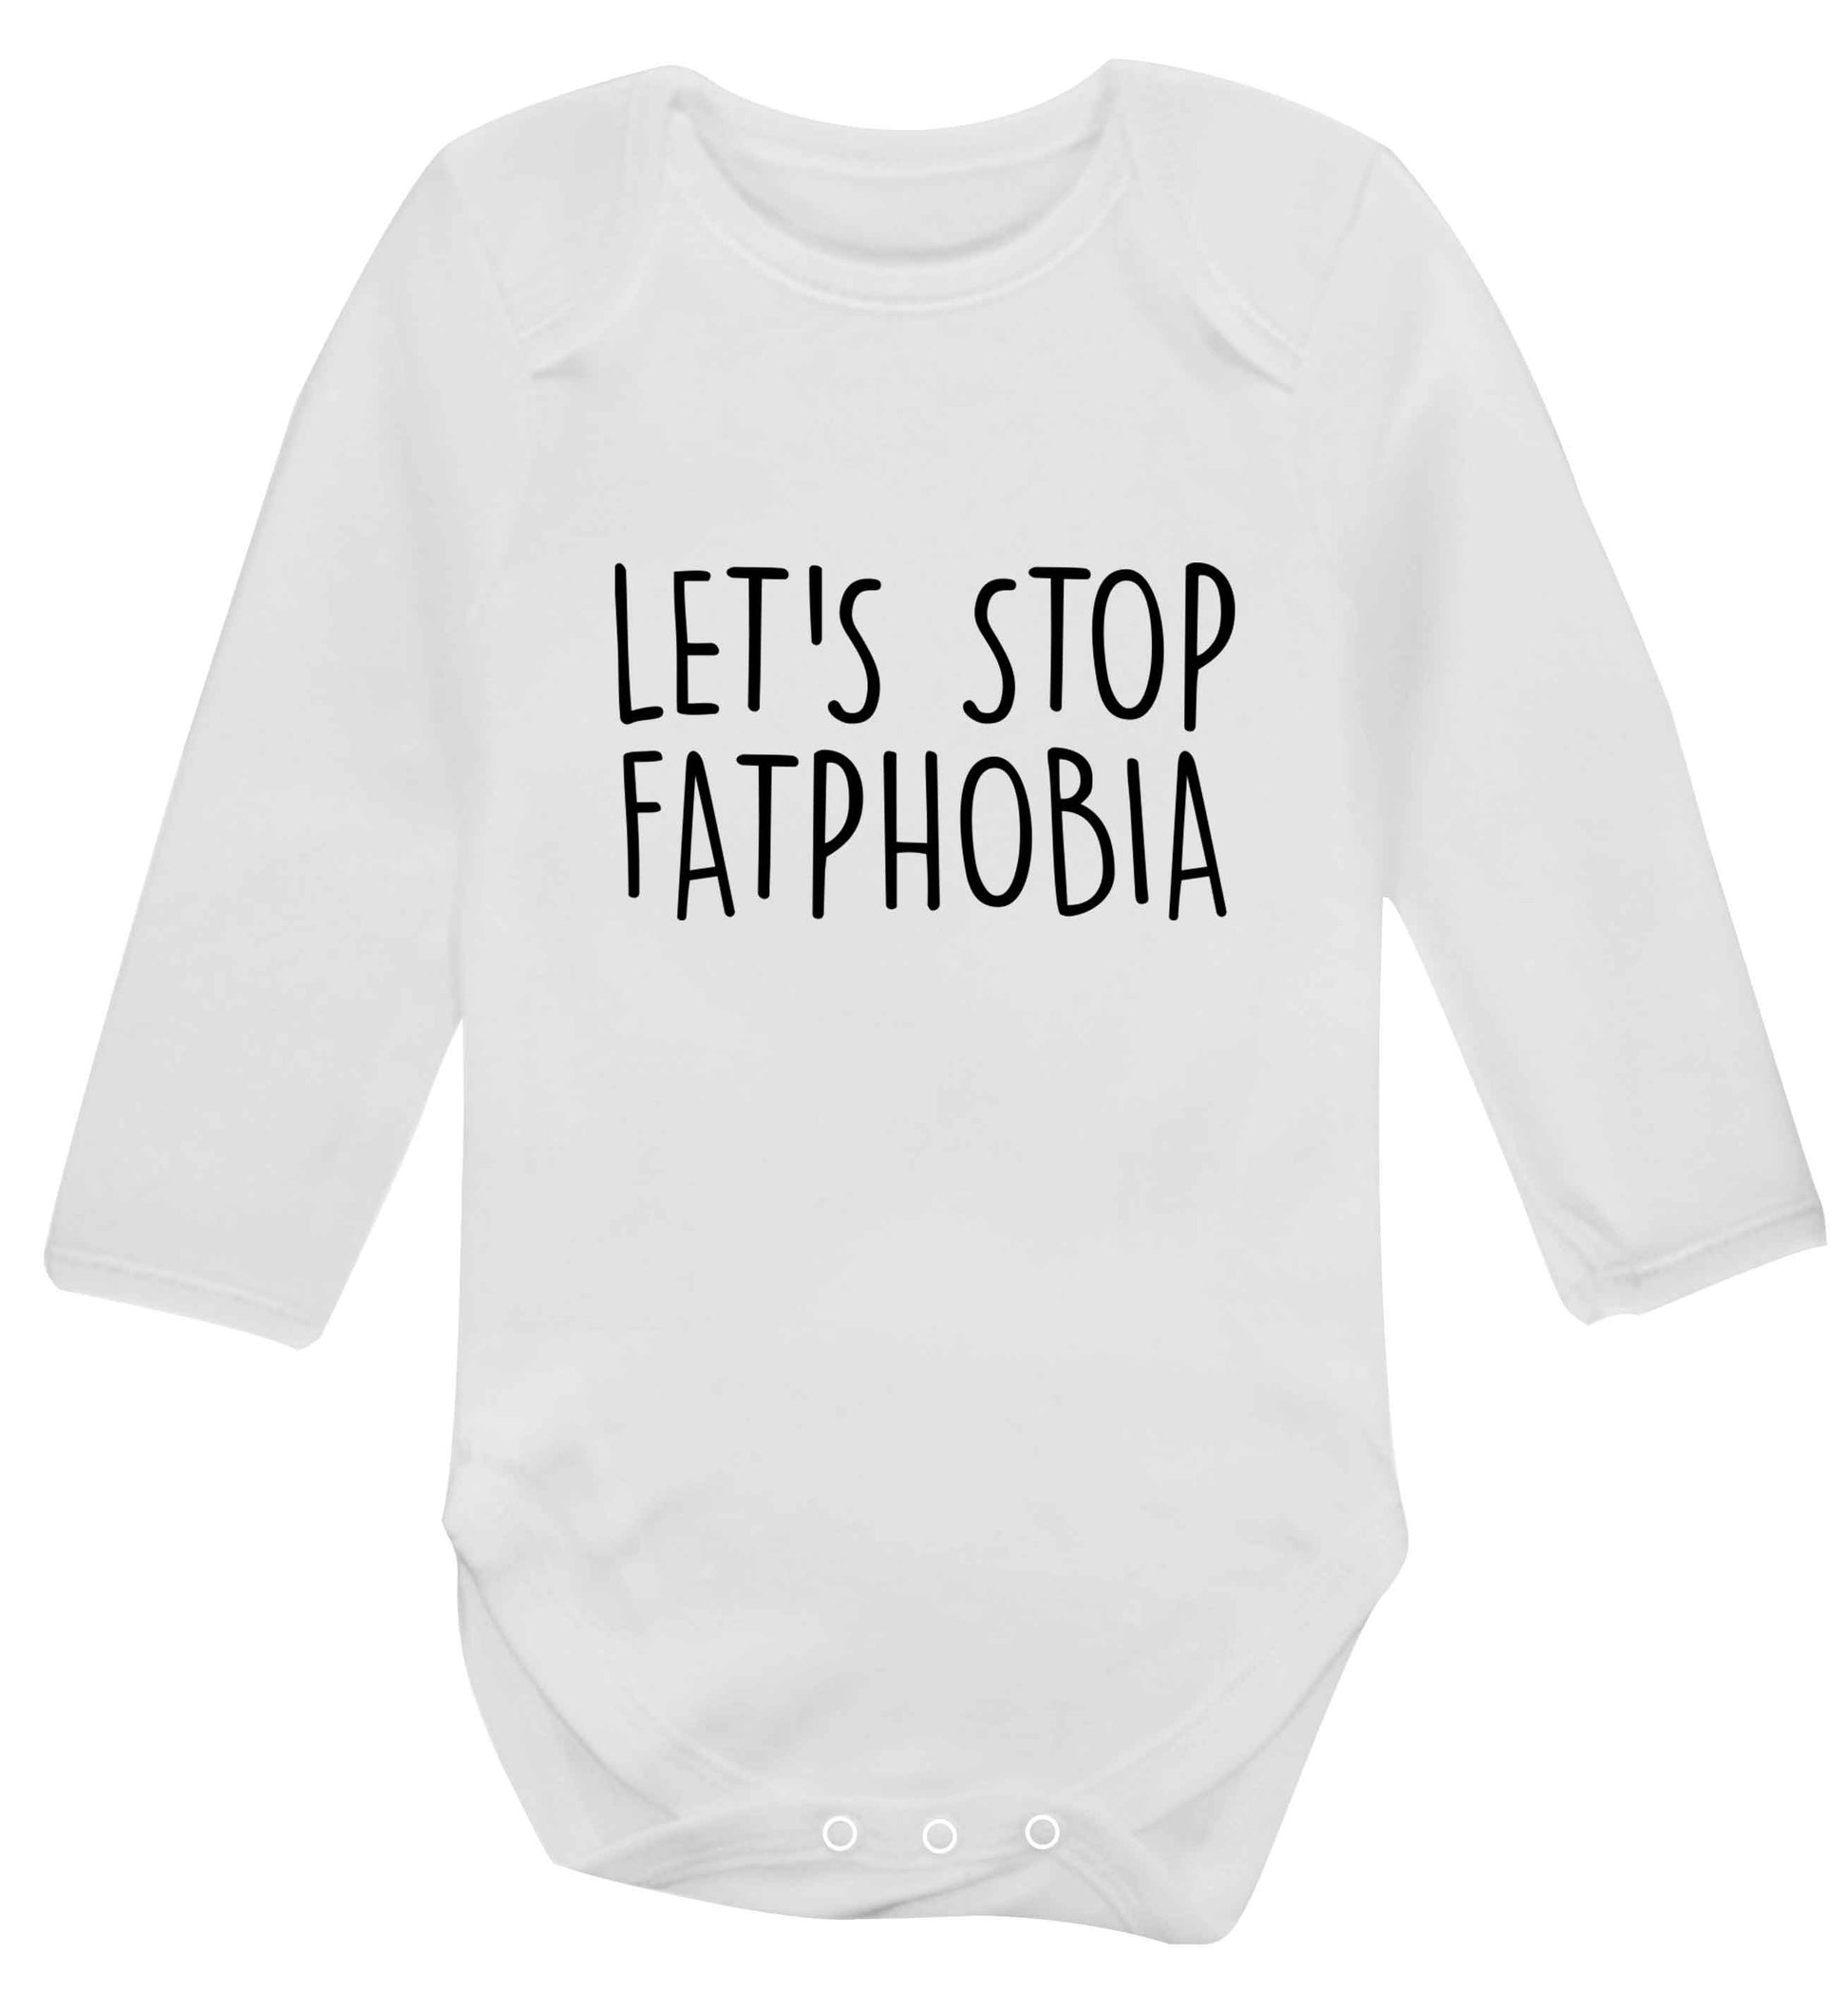 Let's stop fatphobia baby vest long sleeved white 6-12 months